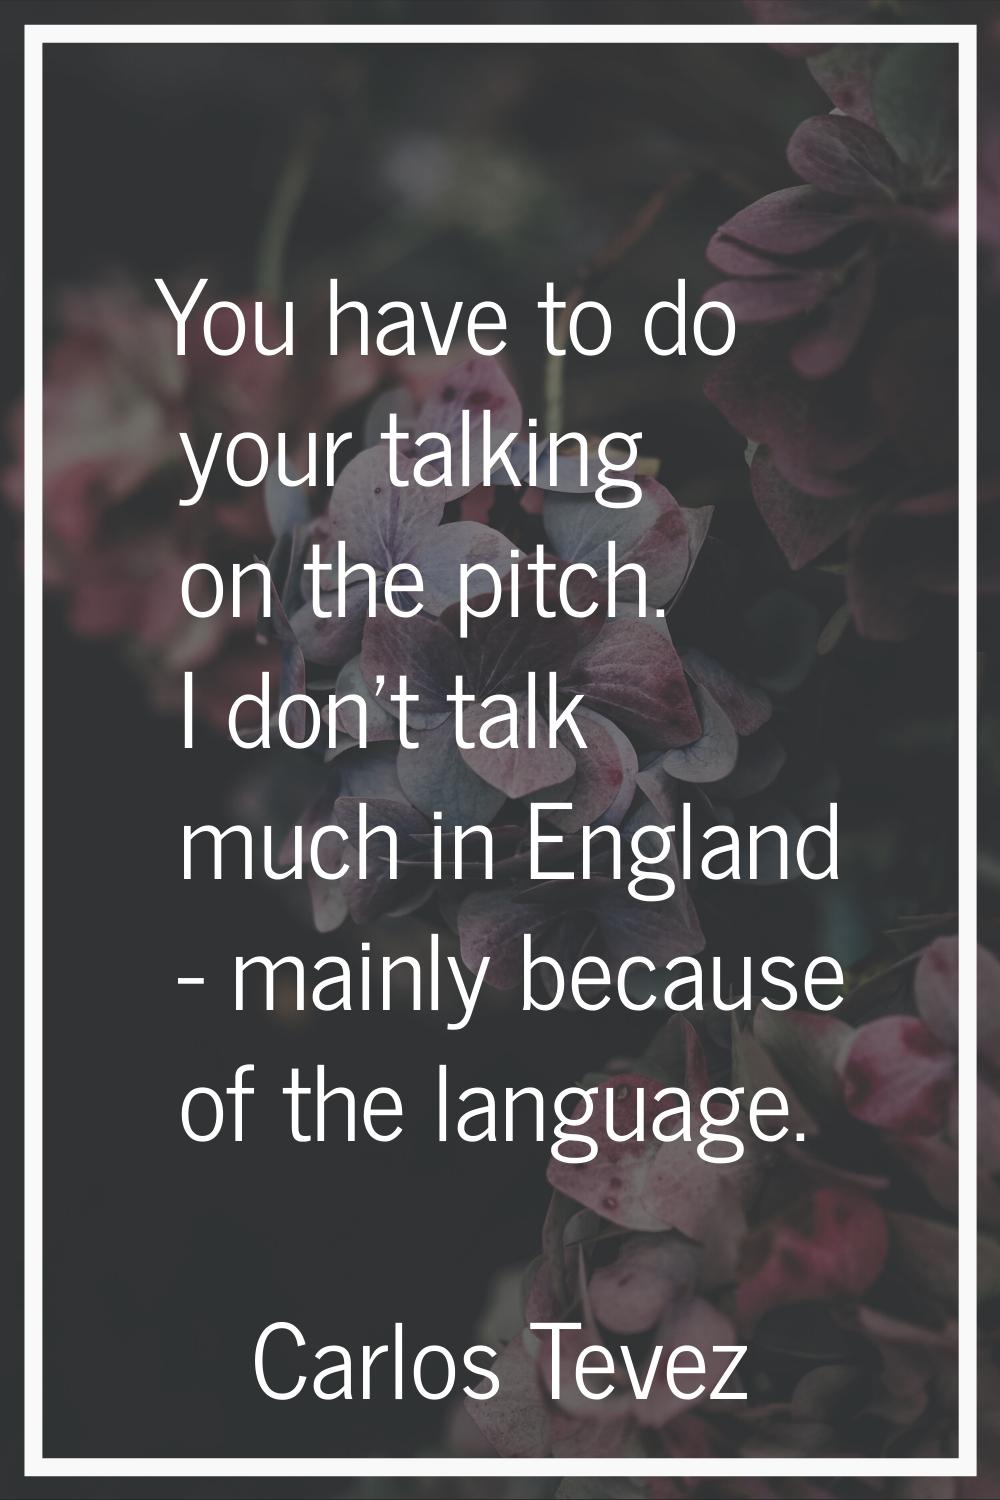 You have to do your talking on the pitch. I don't talk much in England - mainly because of the lang